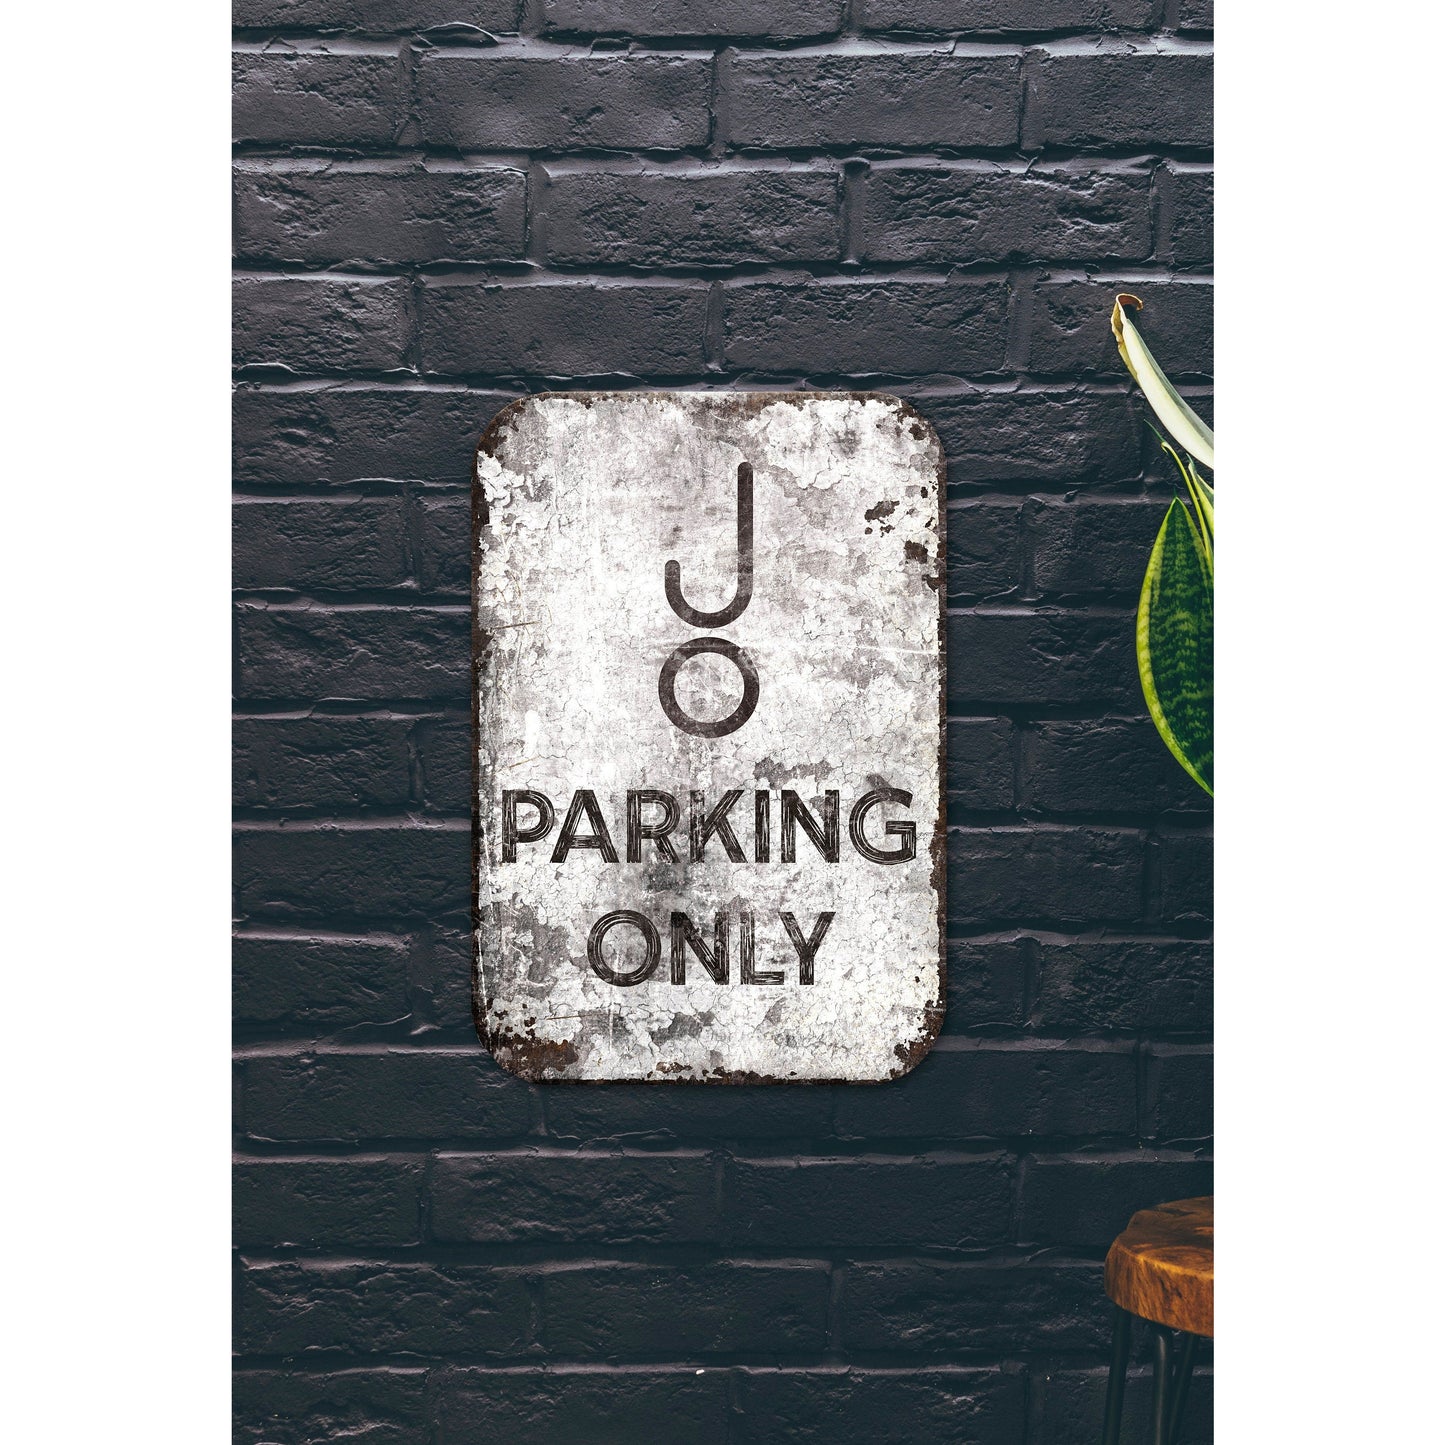 CUSTOM CATTLE BRAND No Parking Sign Western Farm and Ranch Sign Vintage Signage Retro Distressed Custom Sign Grunge Street Sign for Acreage